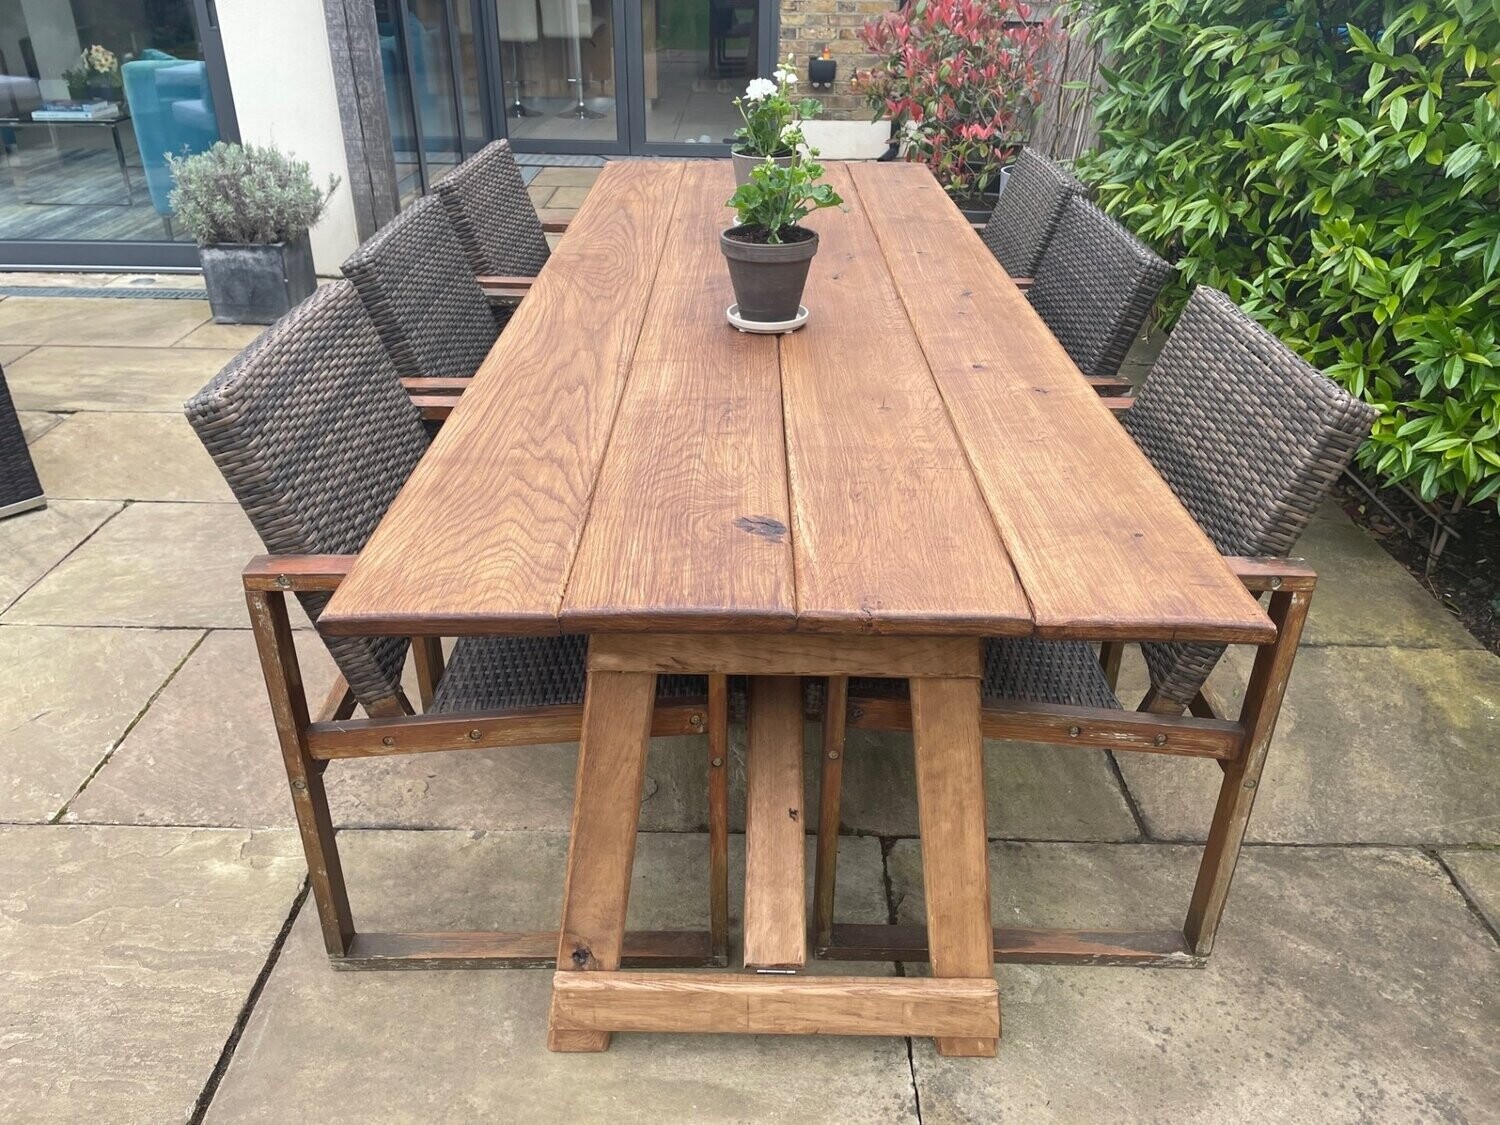 6ft outdoor Solid Oak 4 plank folding Events Dining Table 1.8m x 90cm folds flat for storage brass fixings Hand Made in UK